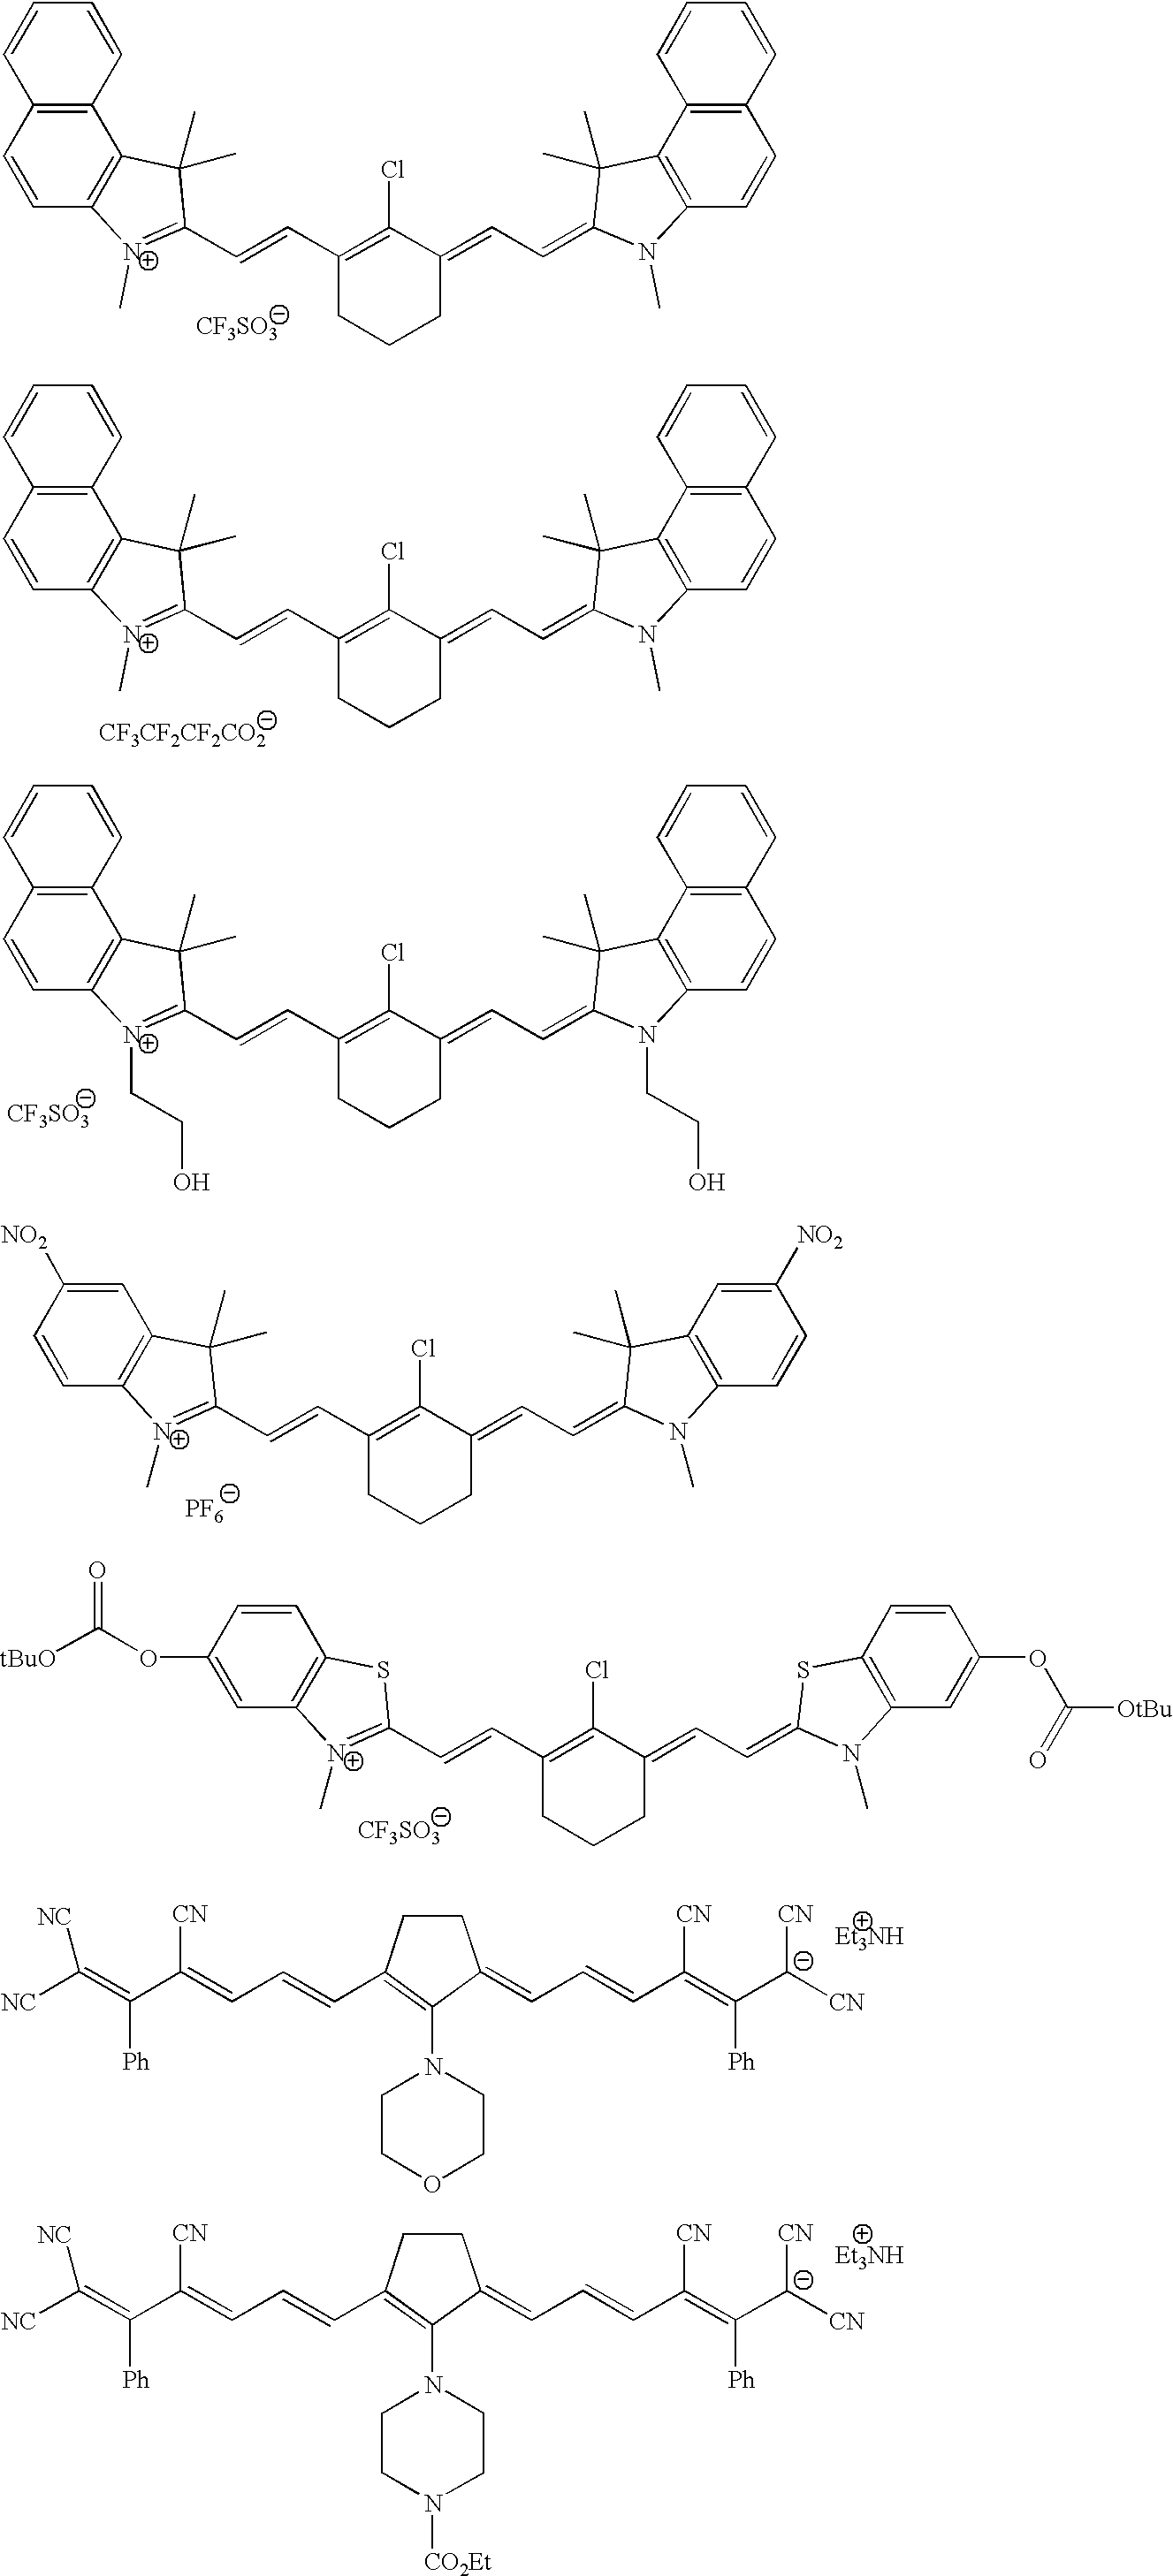 Thermal initiator system using leuco dyes and polyhalogene compounds